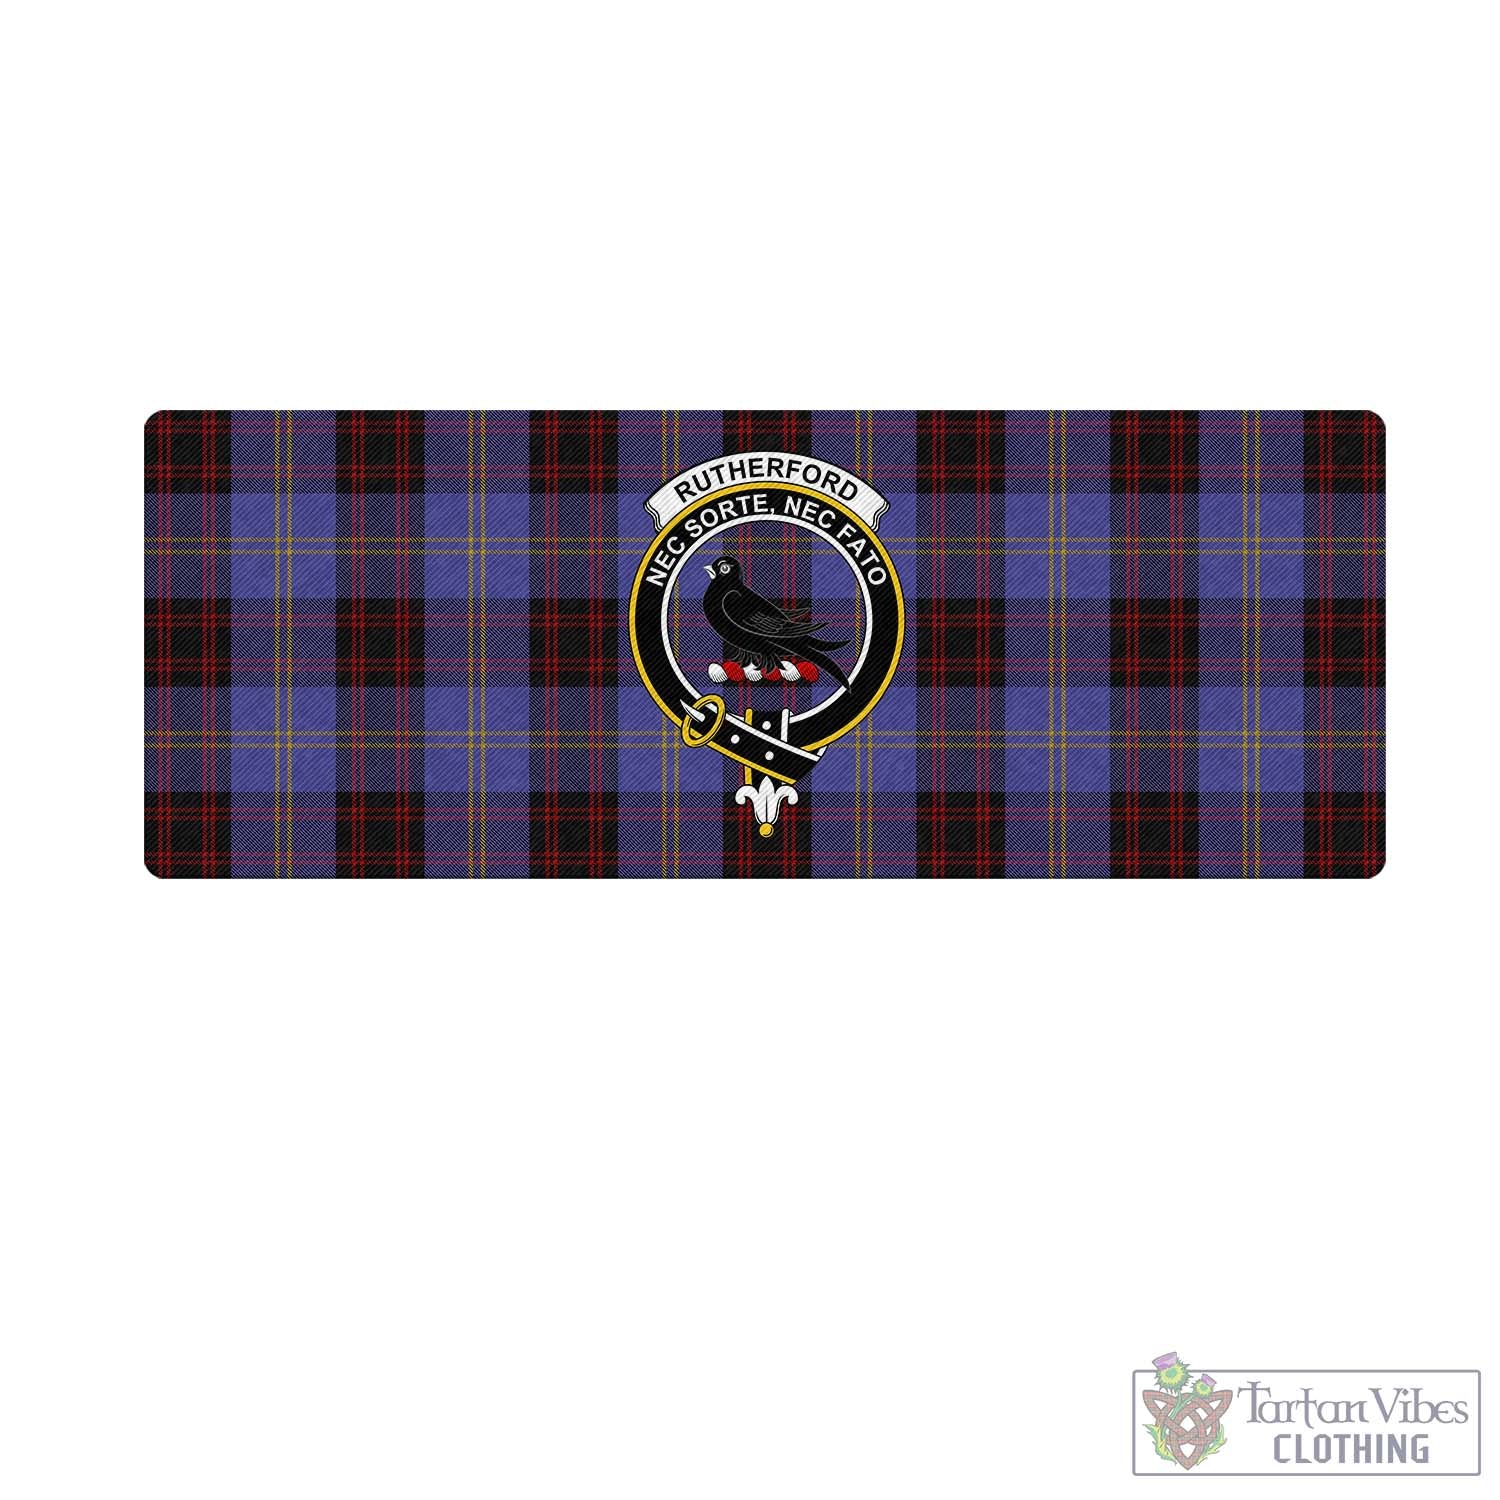 Tartan Vibes Clothing Rutherford Tartan Mouse Pad with Family Crest